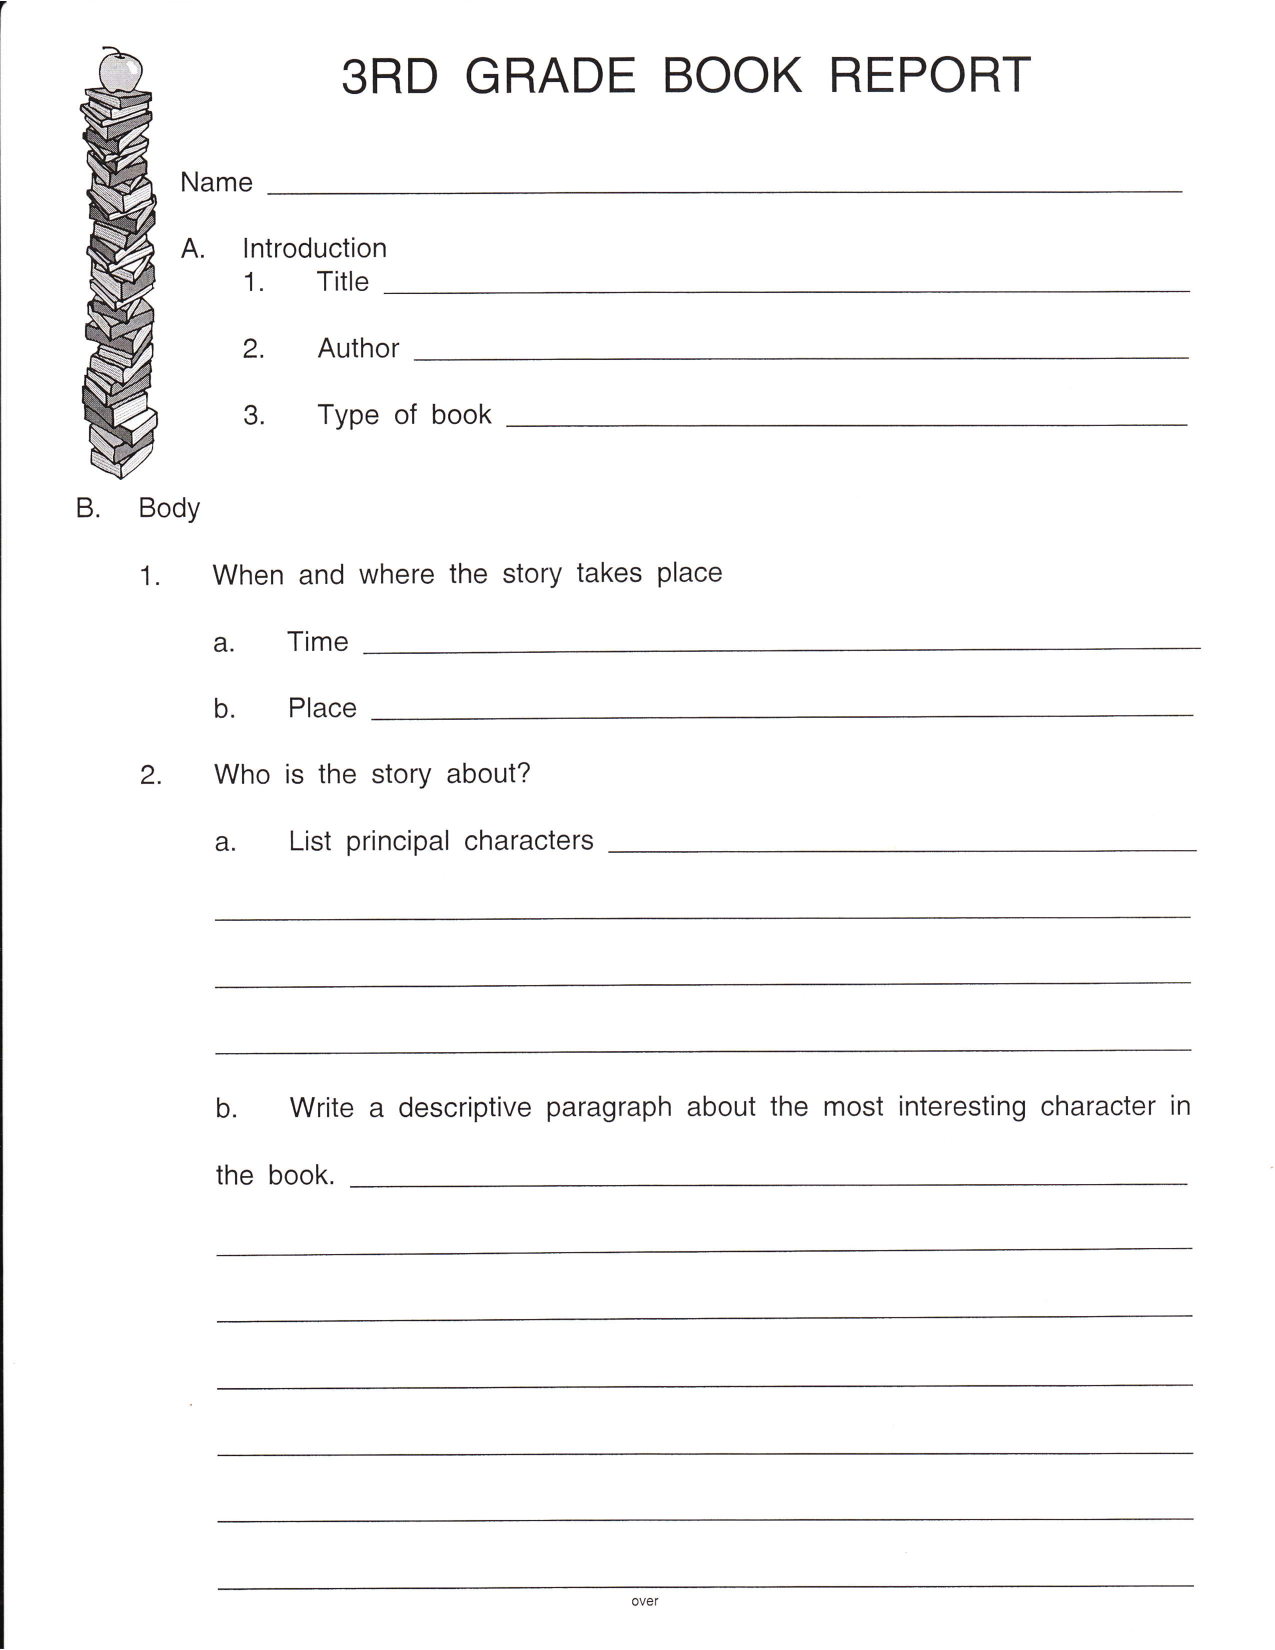 Pinshelena Schweitzer On Classroom Reading | Book Report Intended For 1St Grade Book Report Template